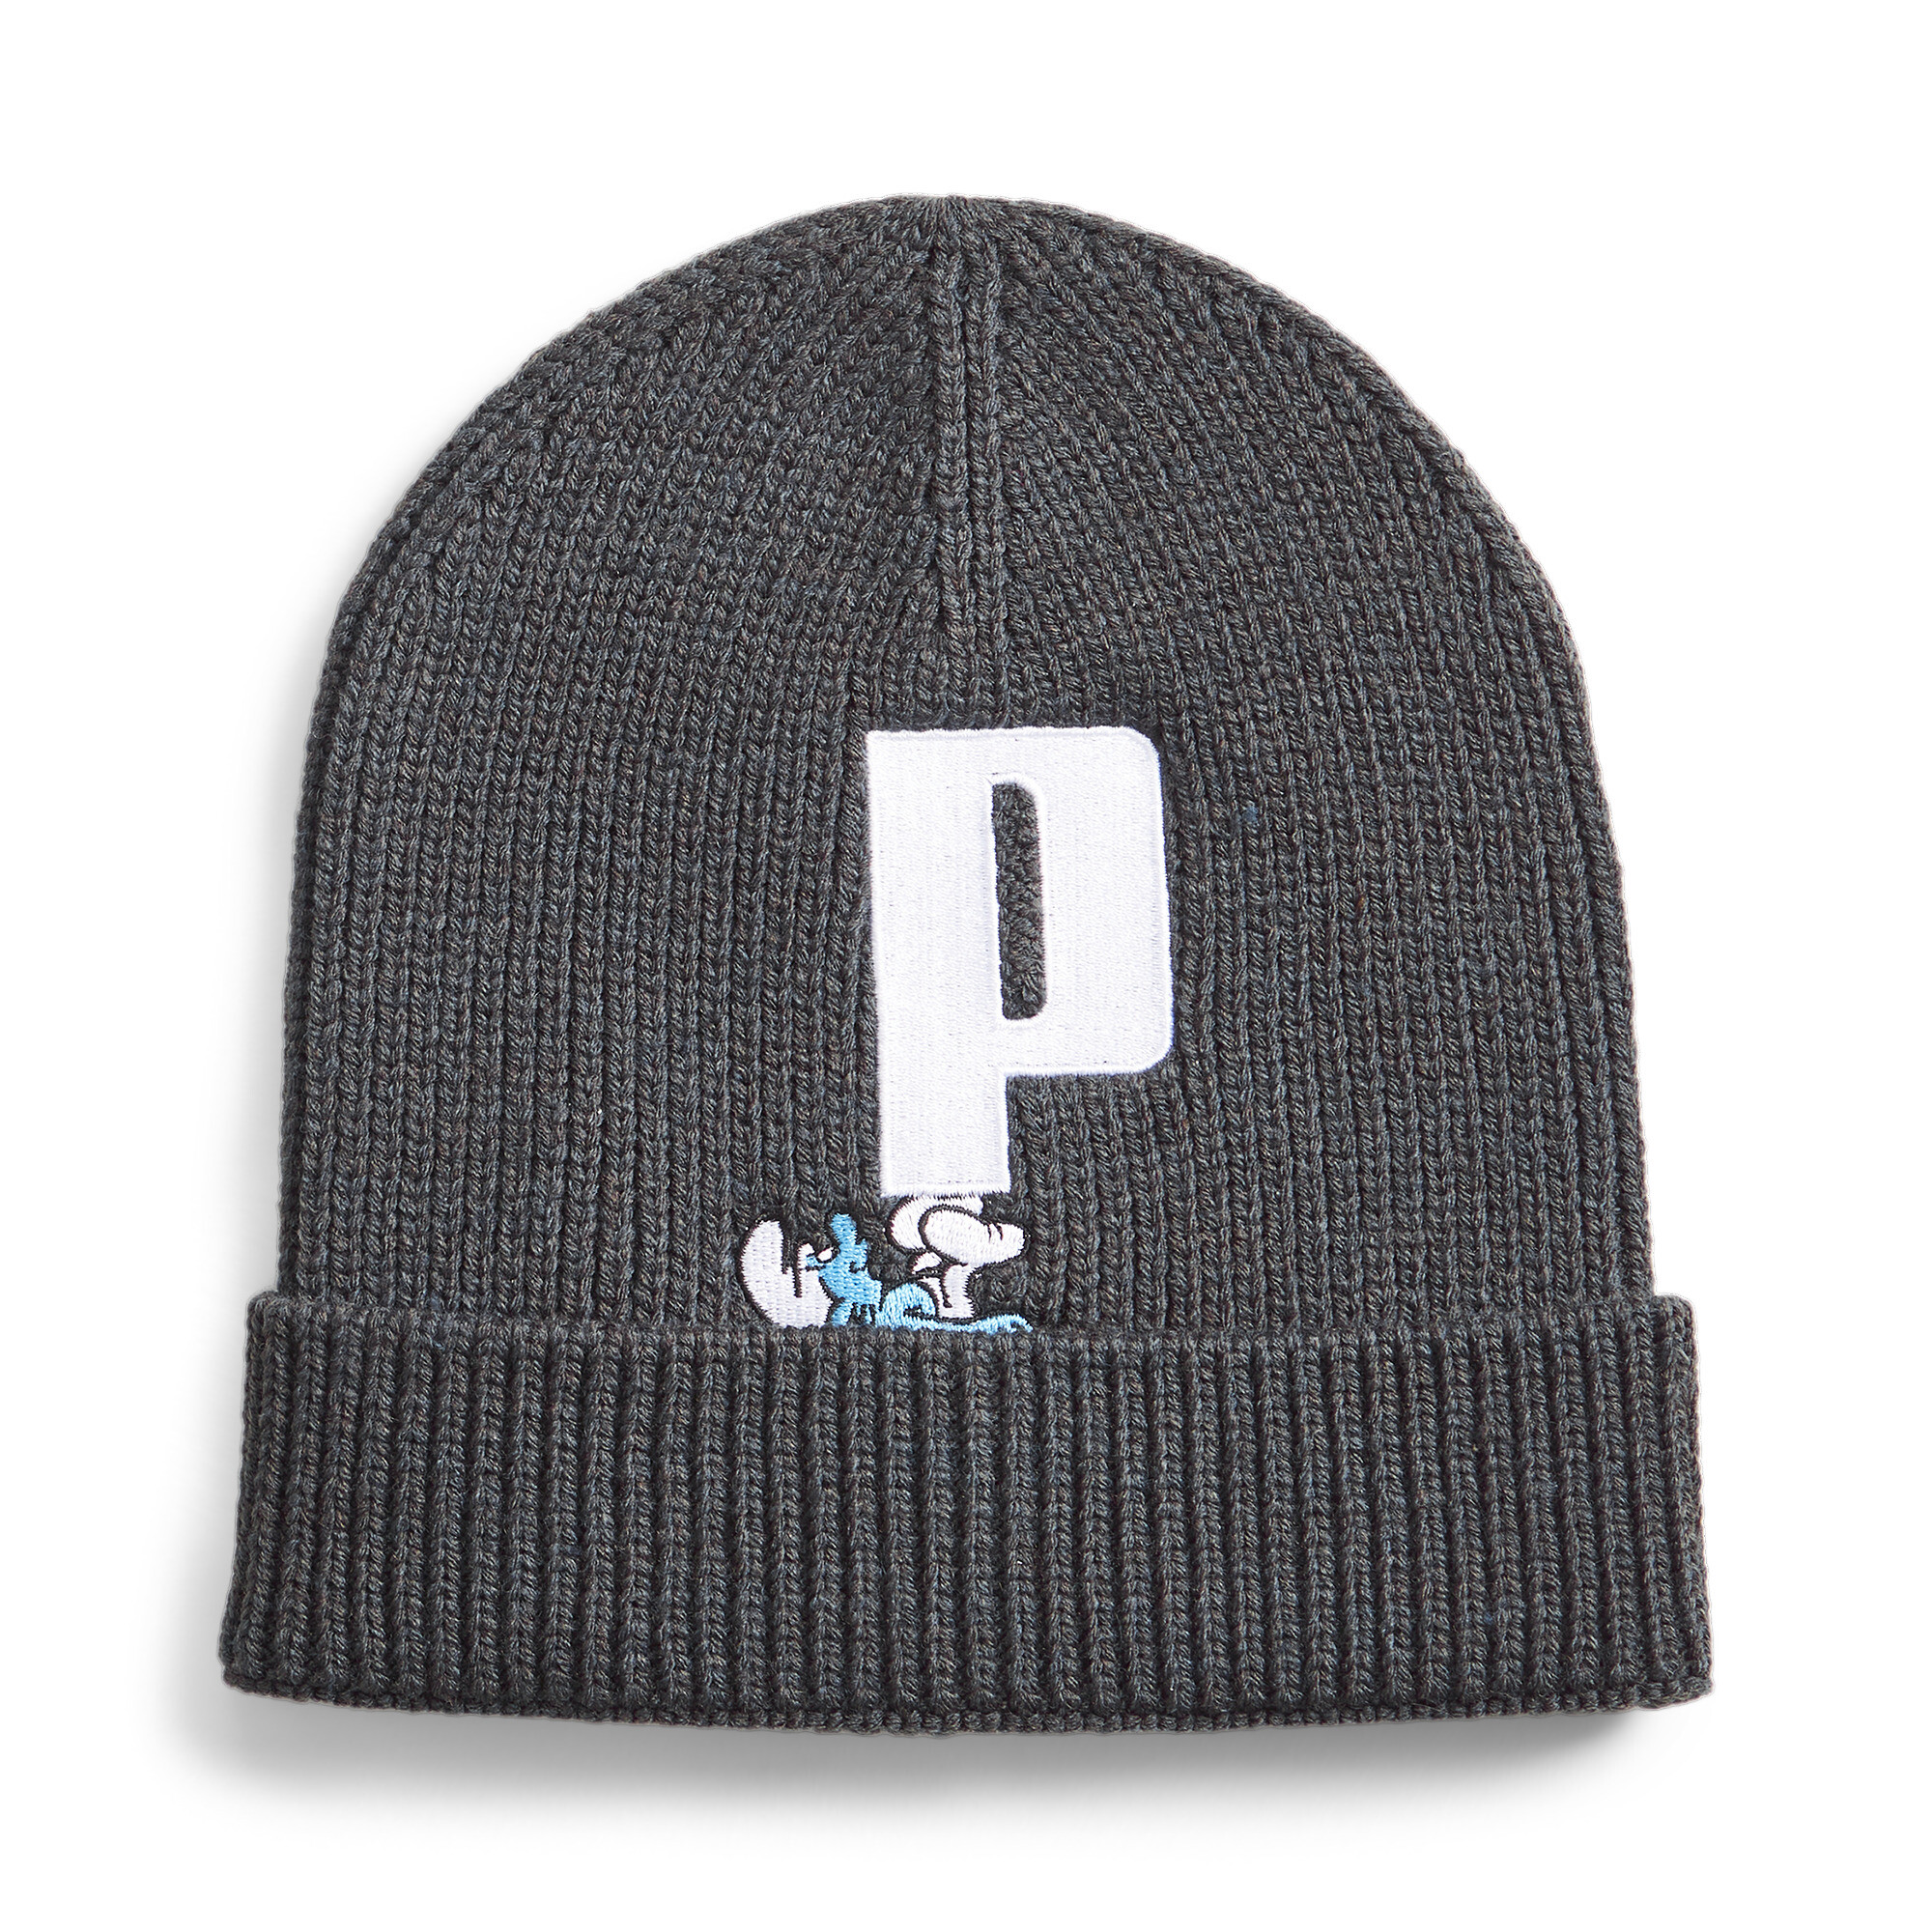 PUMA X THE SMURFS Beanie In Gray, Size Youth